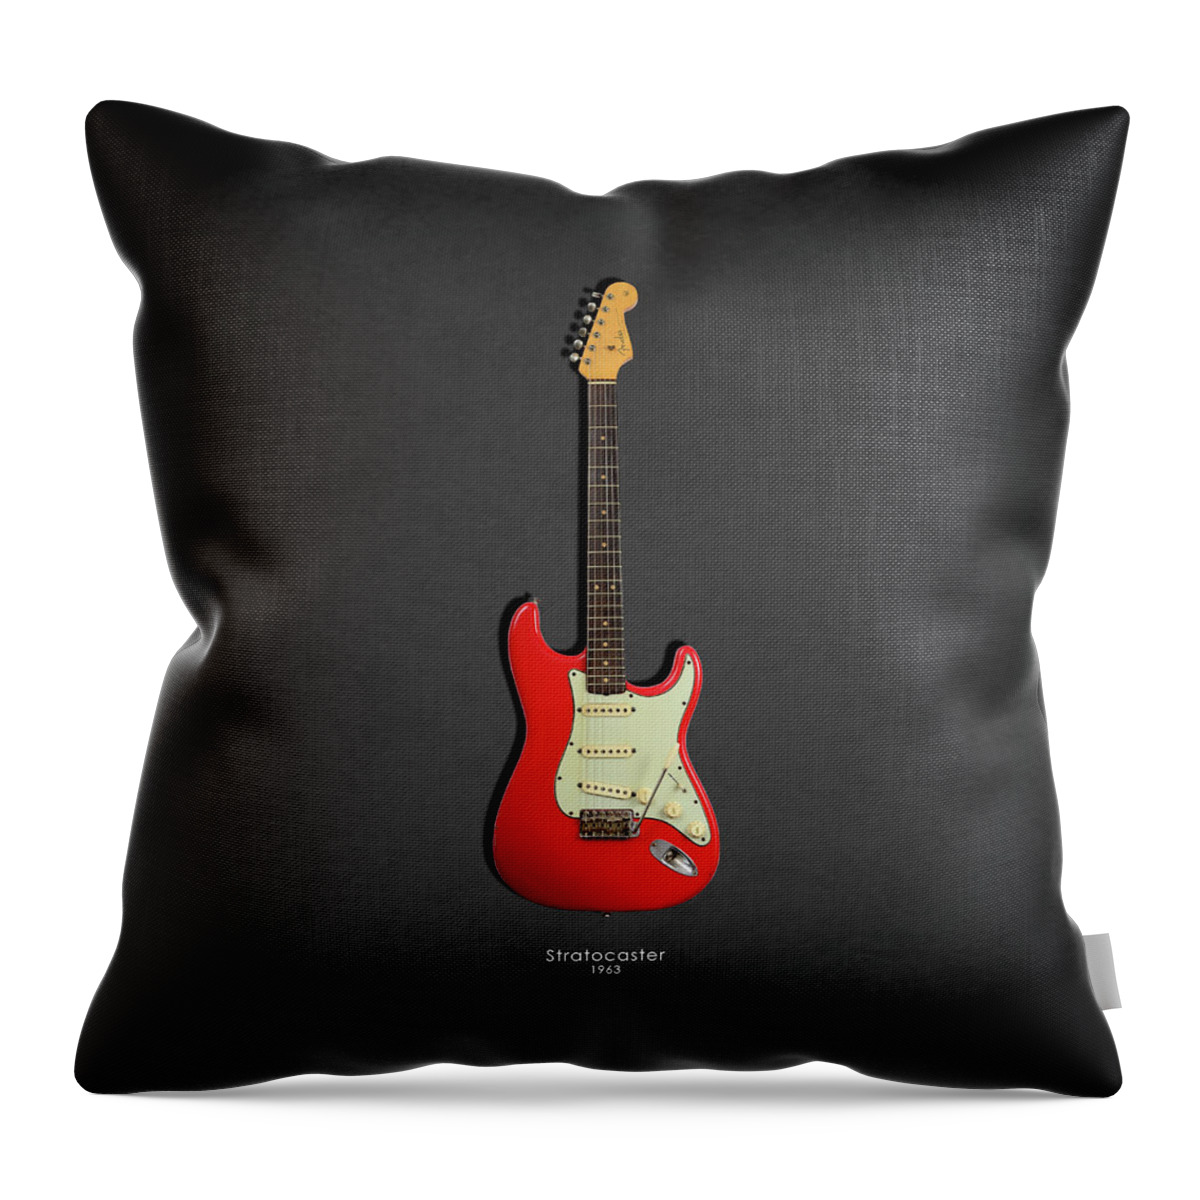 Fender Stratocaster Throw Pillow featuring the photograph Fender Stratocaster 63 by Mark Rogan